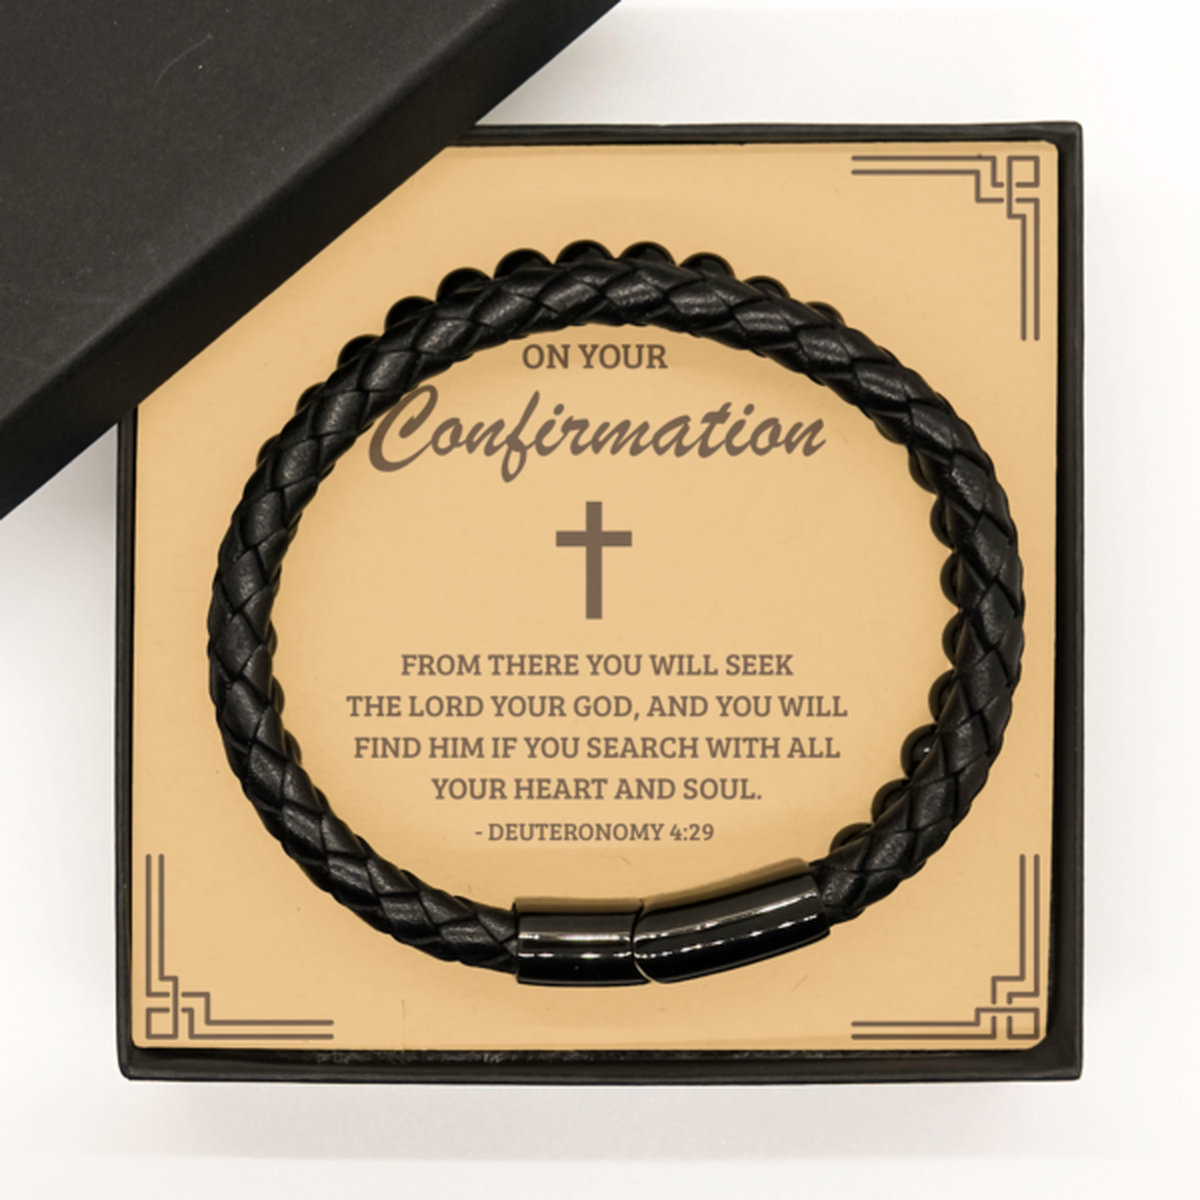 Confirmation Gifts for Teenage Boys, From there you will seek the Lord your God, Stone Leather Bracelet with Bible Verse Message Card, Religious Catholic Bracelet for Son, Grandson, Dad, Godfather